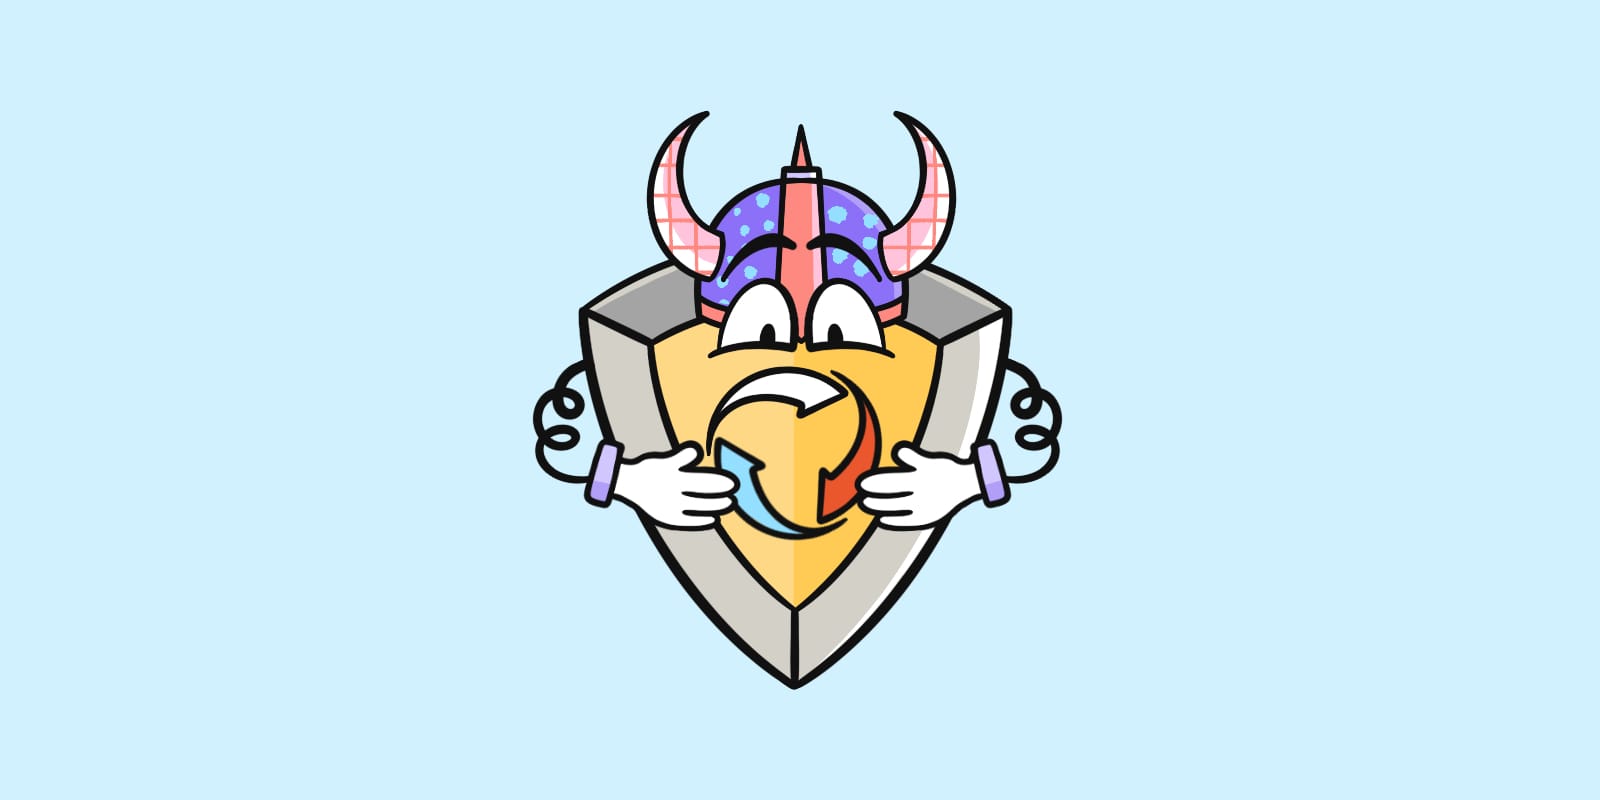 An illustrated image of a shield with eyes and arms